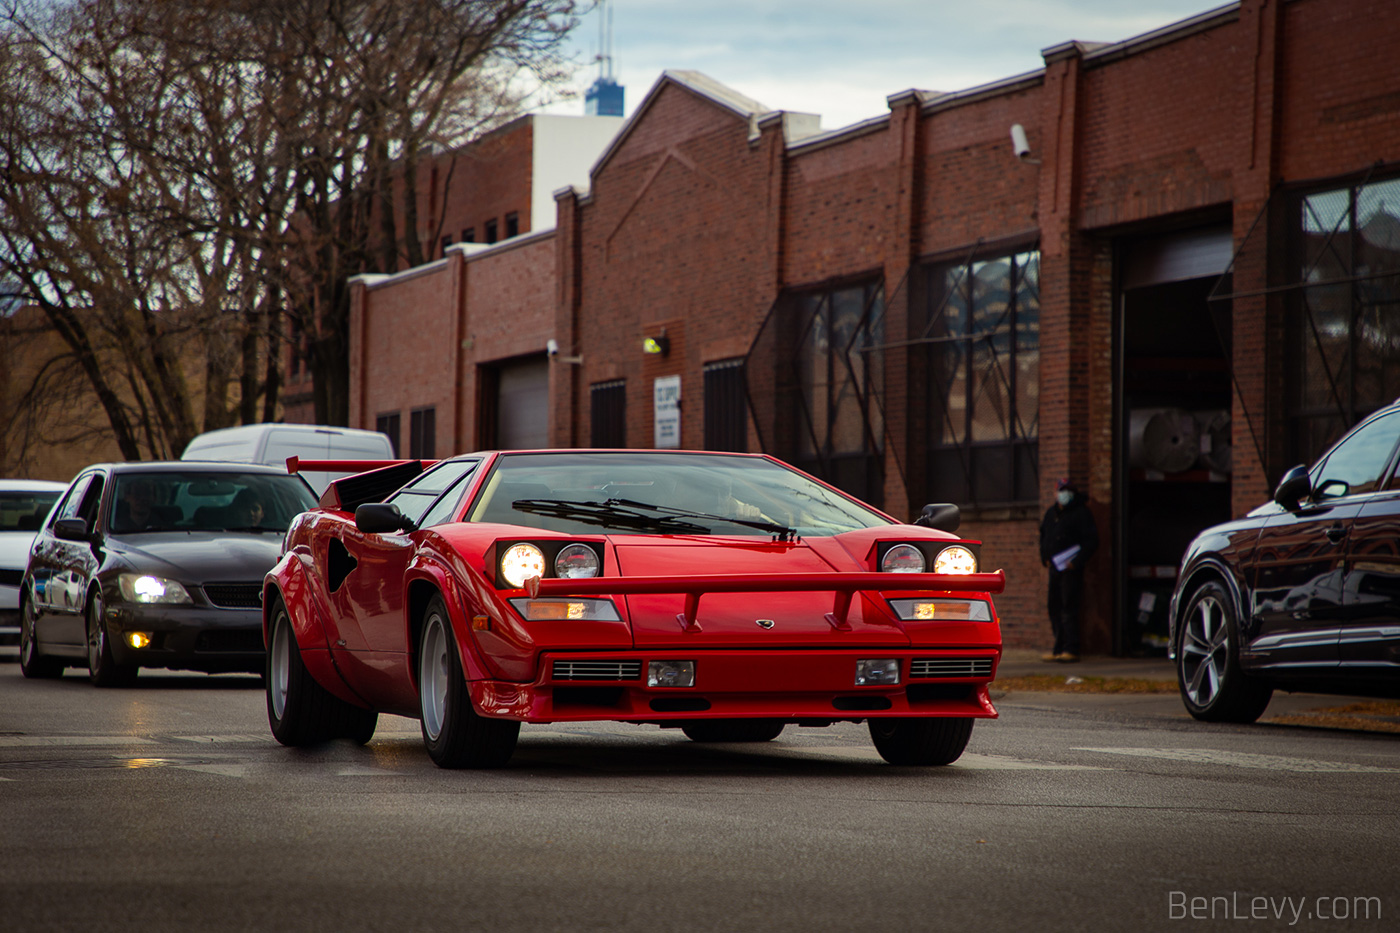 Red Lamborghini Countach with the Popup Headlights Up